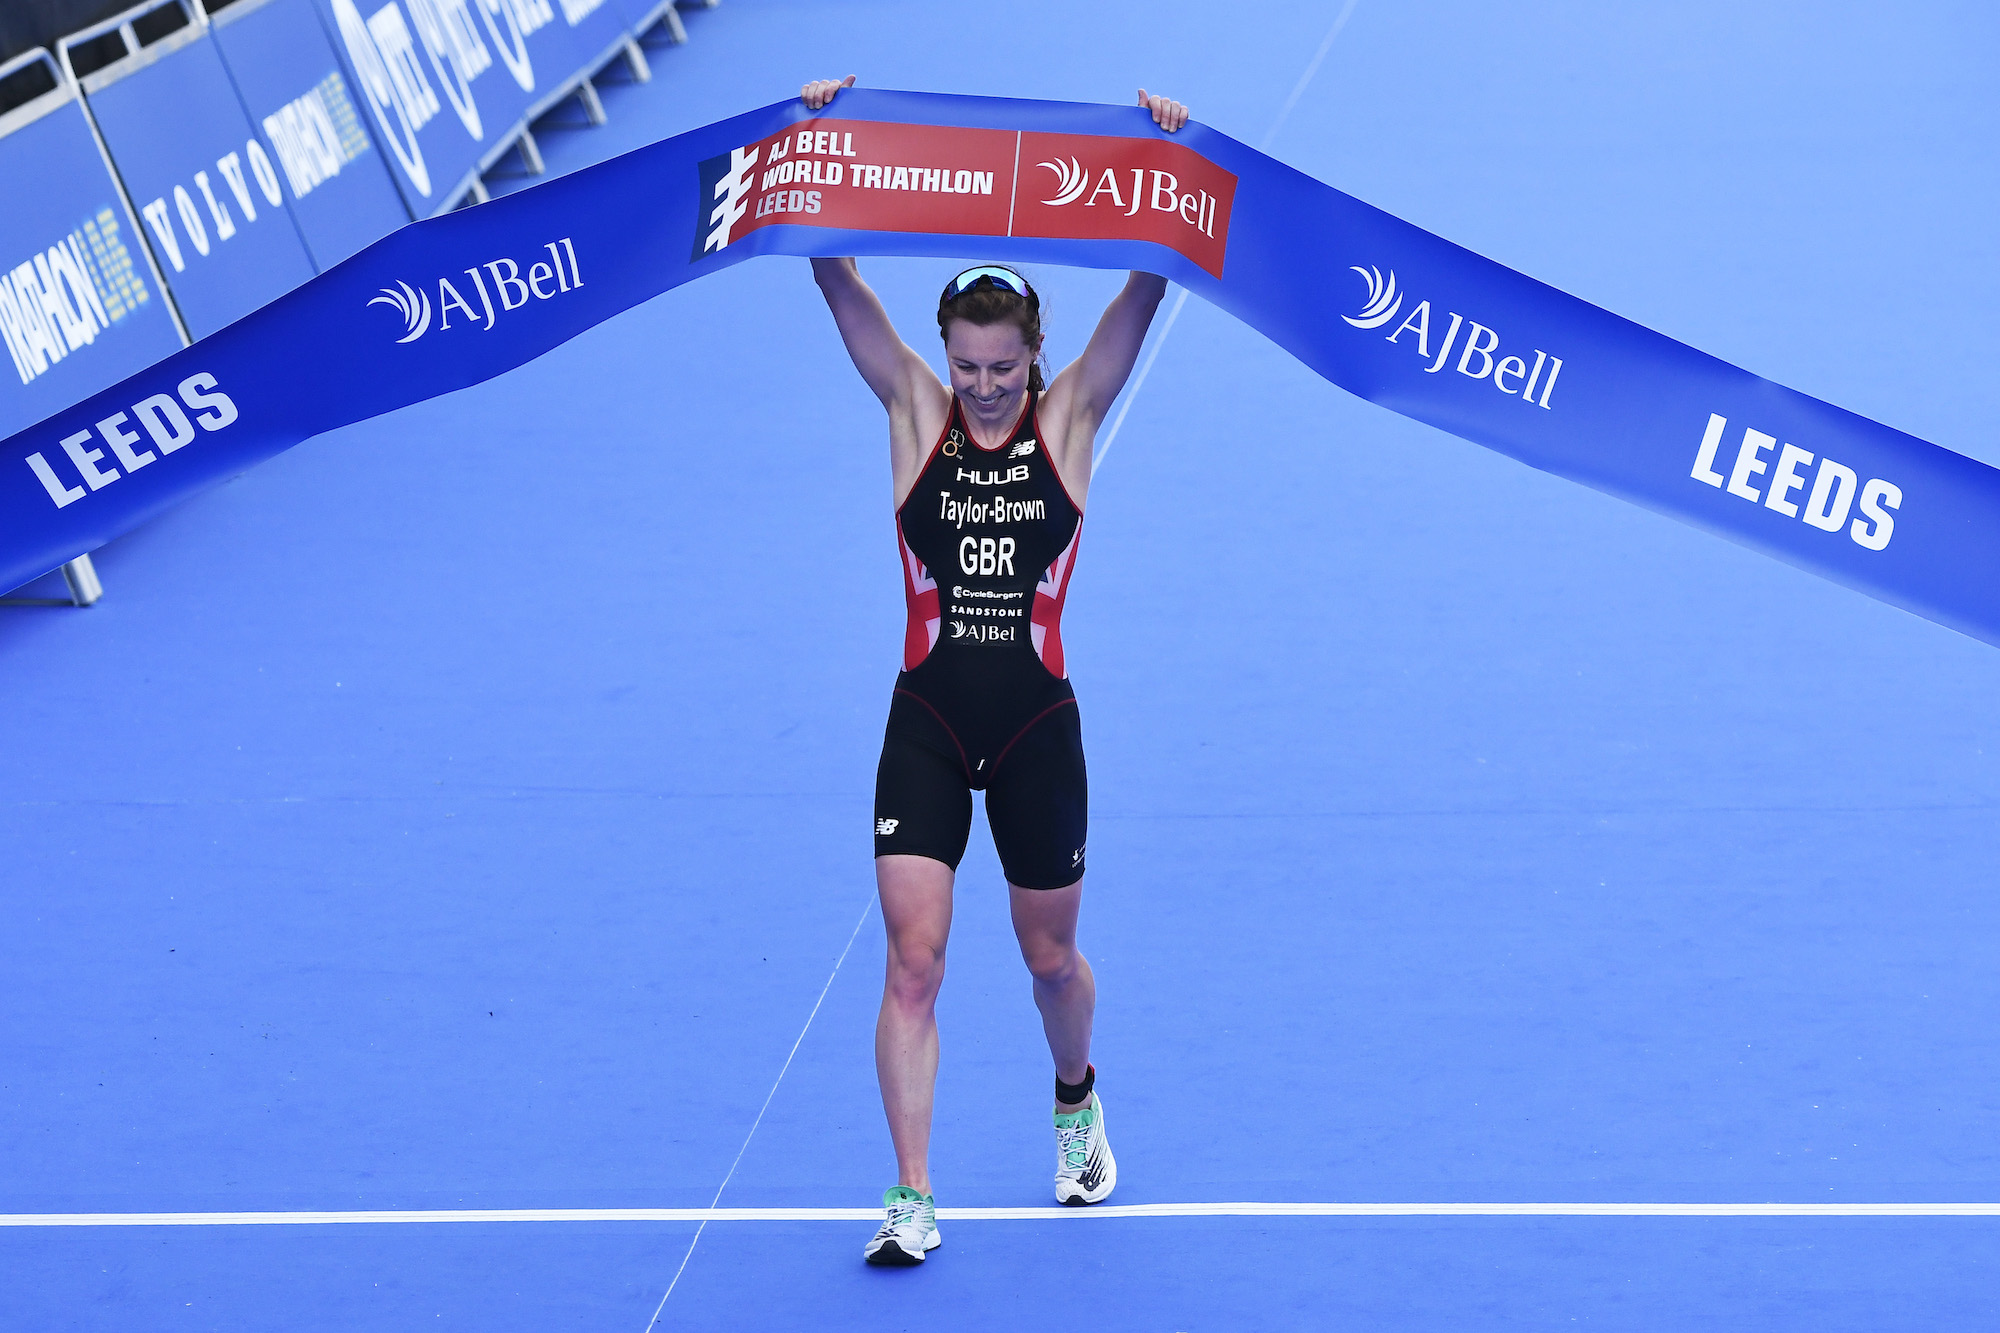 Georgia Taylor-Brown crosses the line in first at World Triathlon Leeds in 2019 (Credit: George Wood/Getty Images)